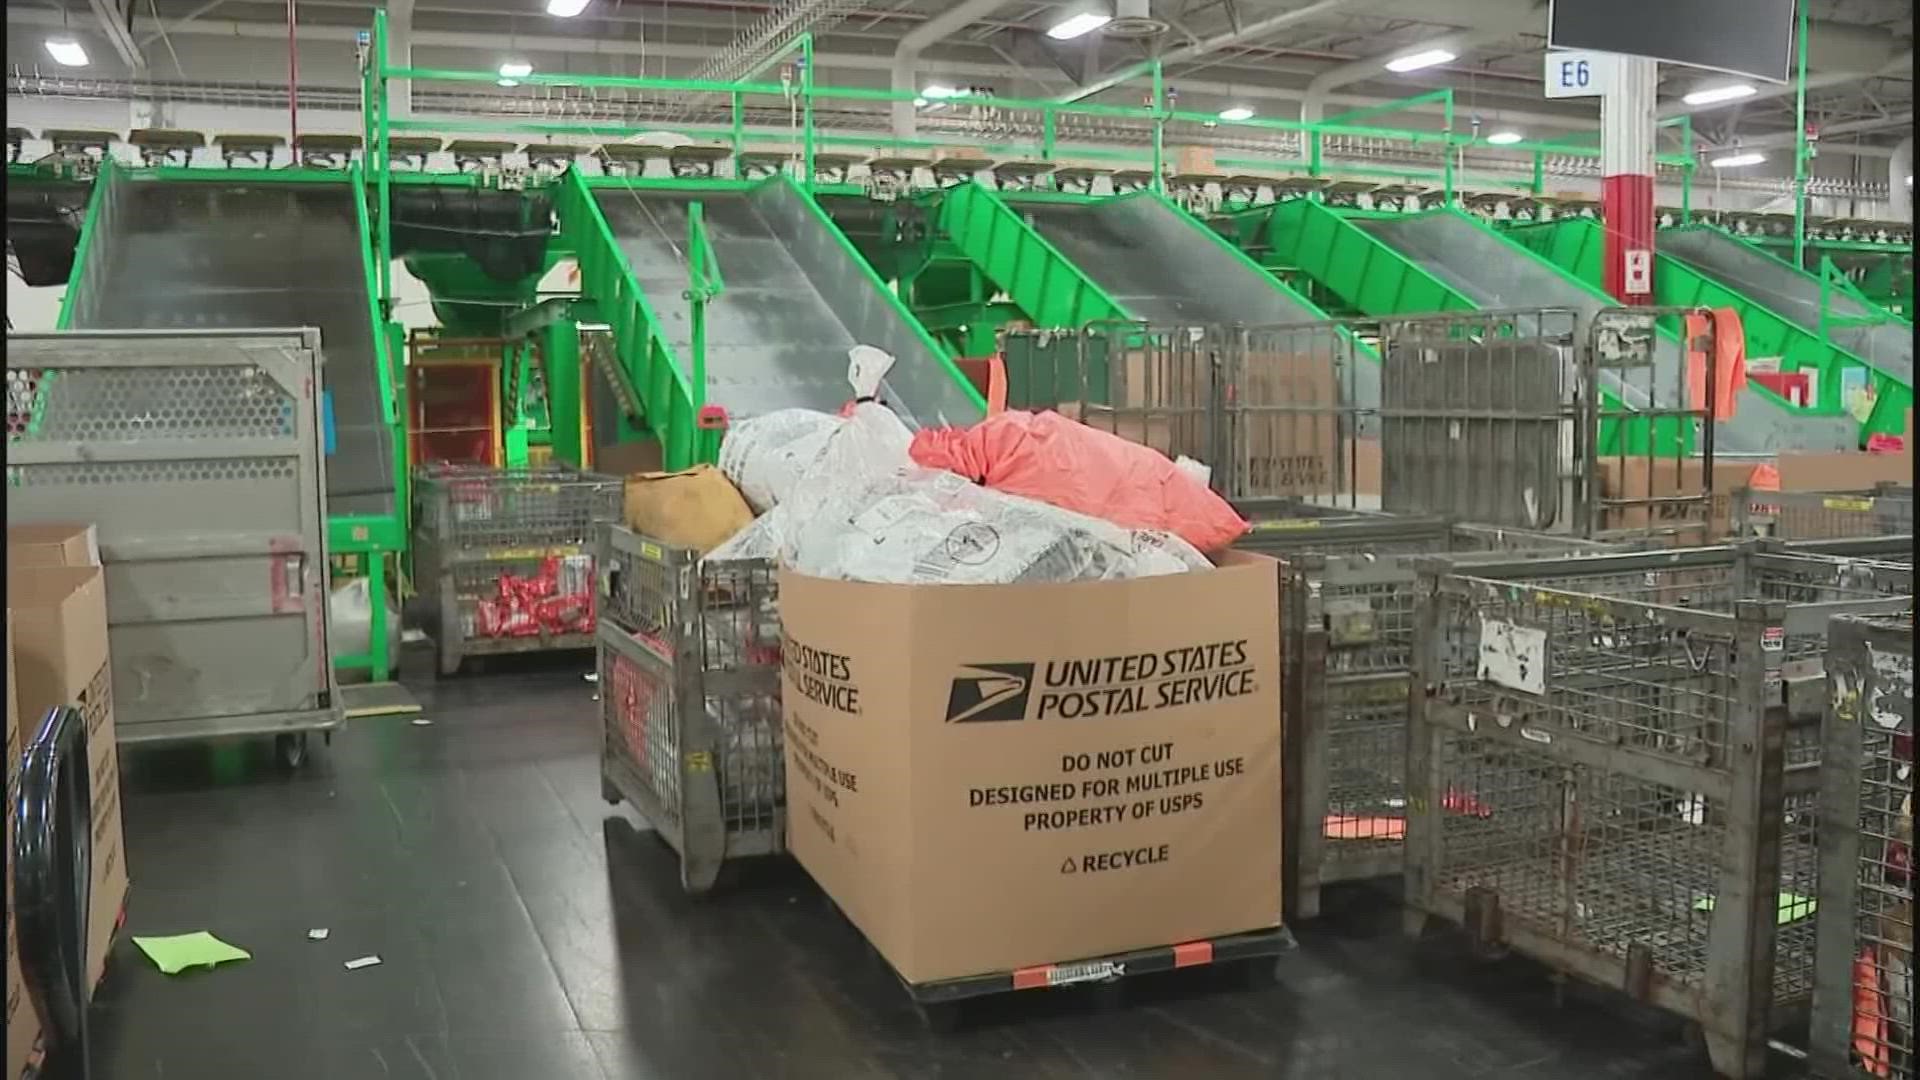 The United States Postal Service said customers need to get their packages in by Dec. 16 to make sure it gets to their destination by Christmas.